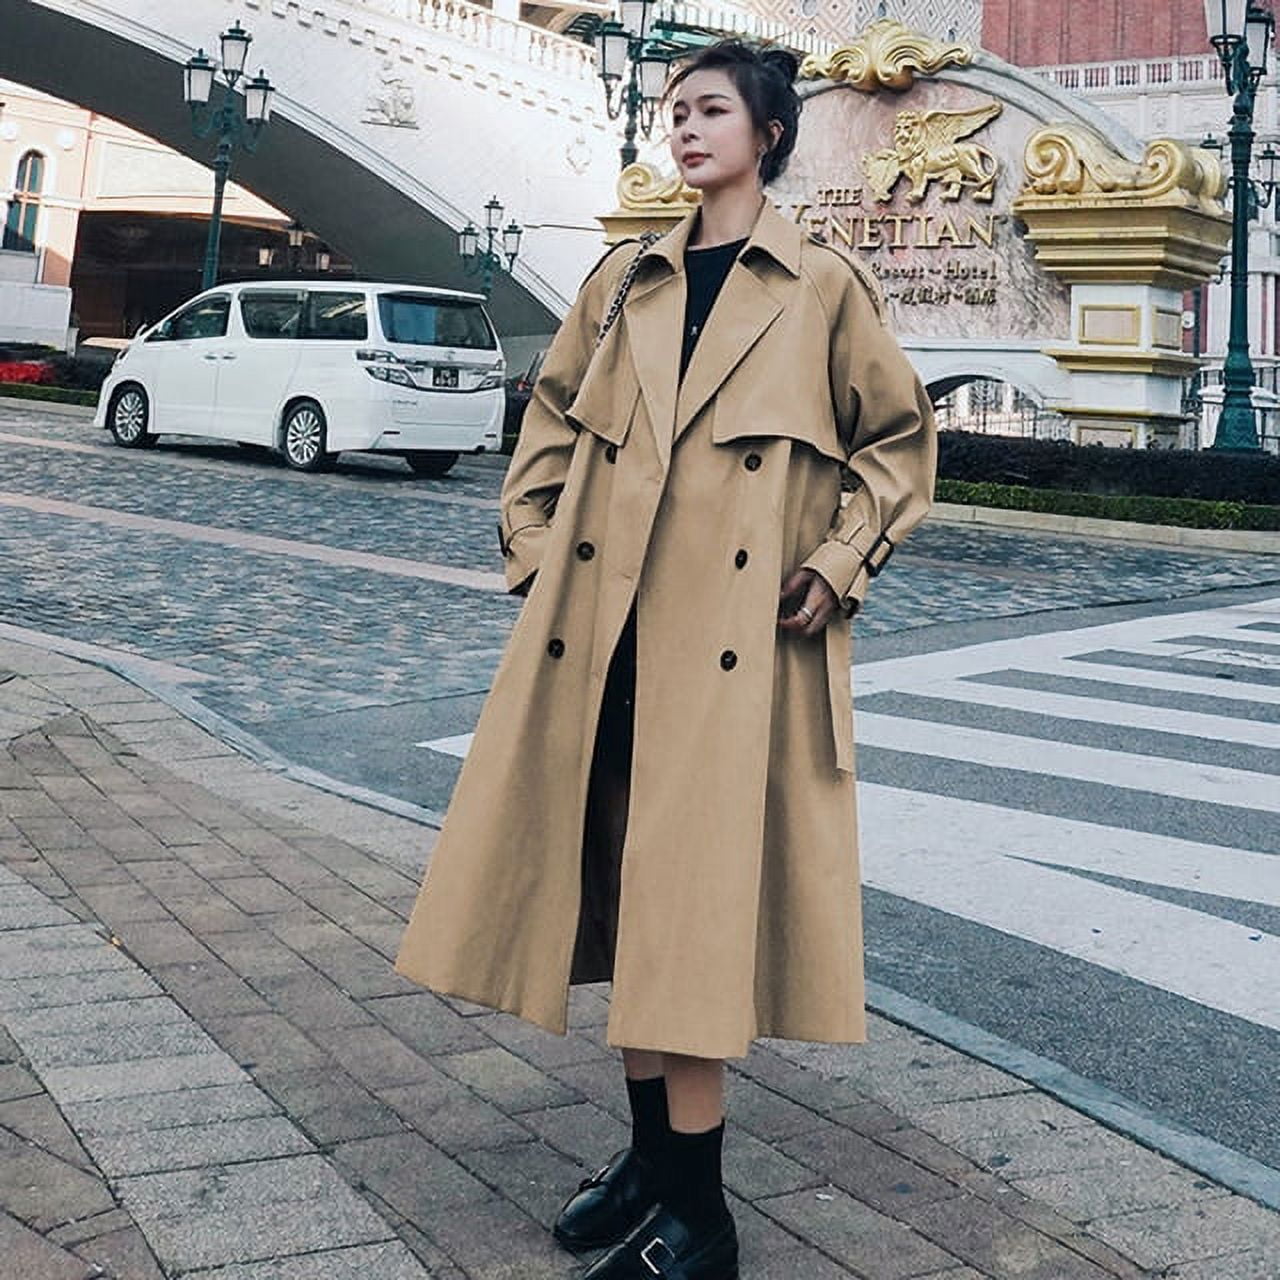 Double-breasted trench coat with belted closure